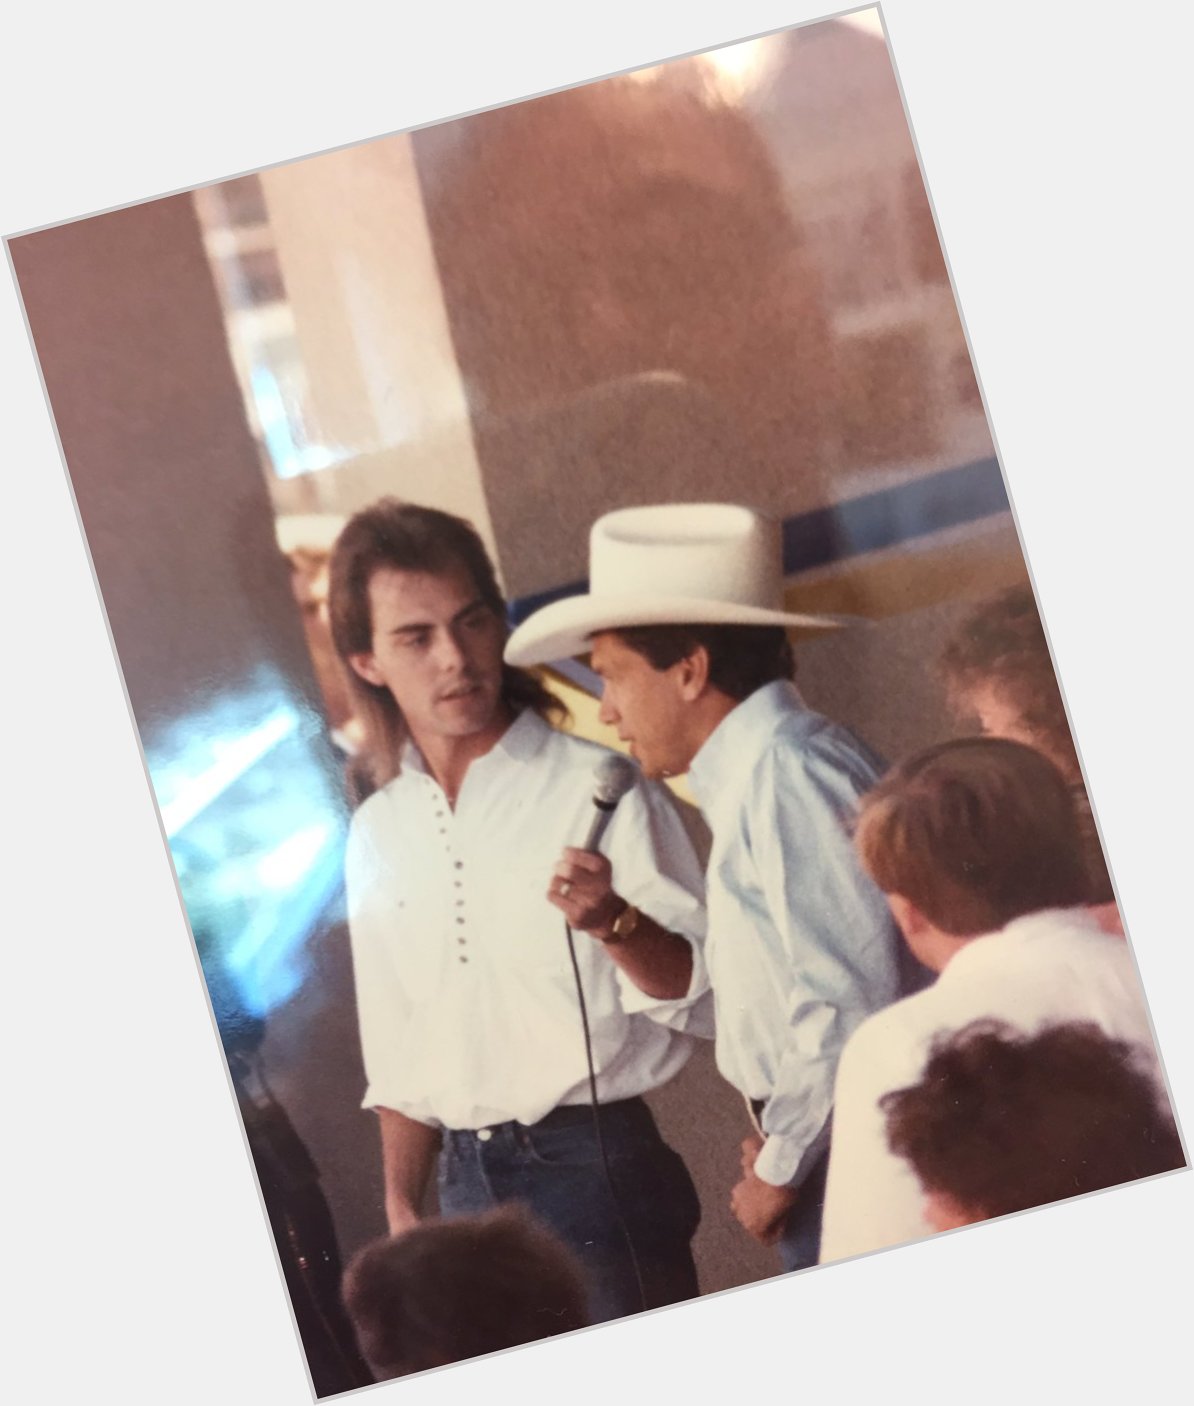 Throwback Dallas in the 80s. Happy Birthday King George Strait! It was an honor to work with you then. 